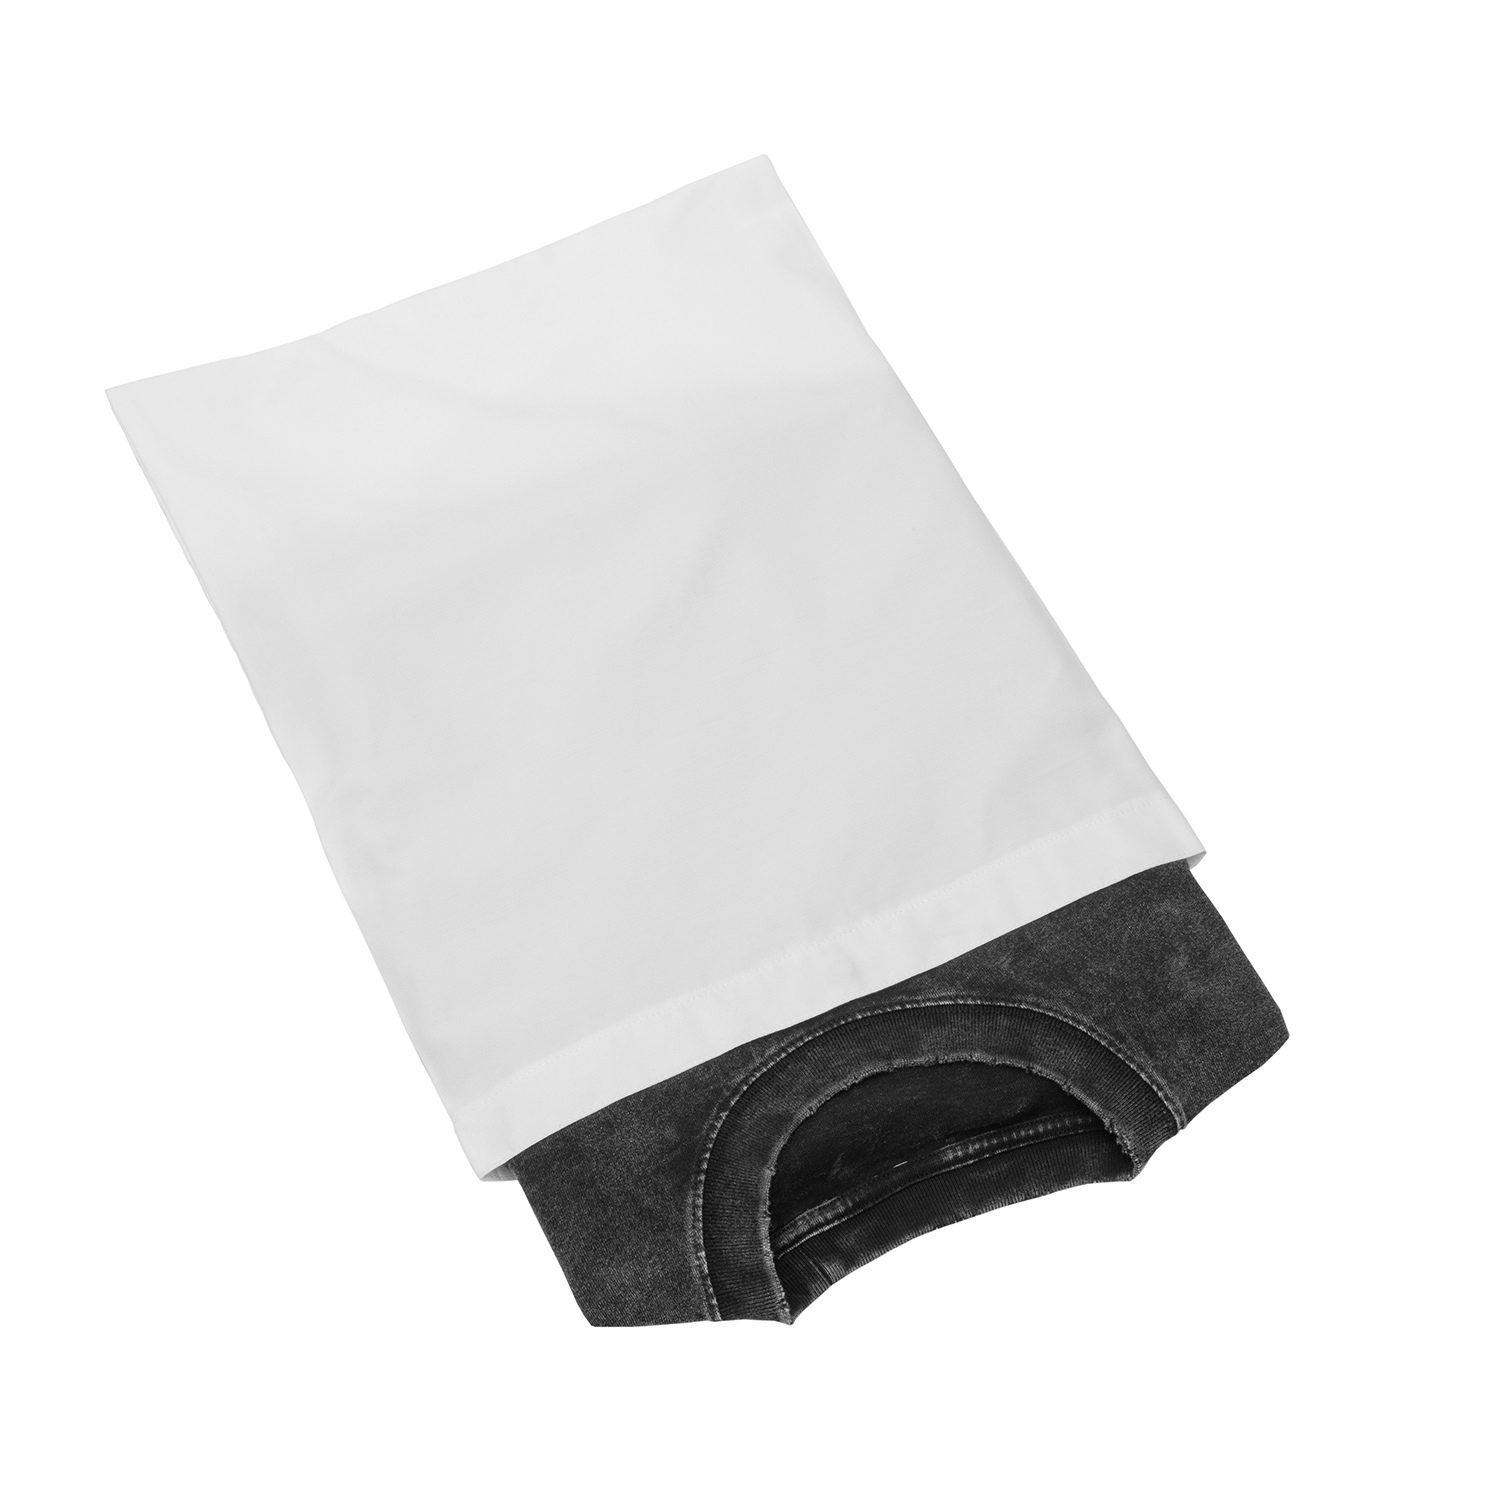 Print On Demand Polyester Packaging Bag for Your Brand | Wholesale-4